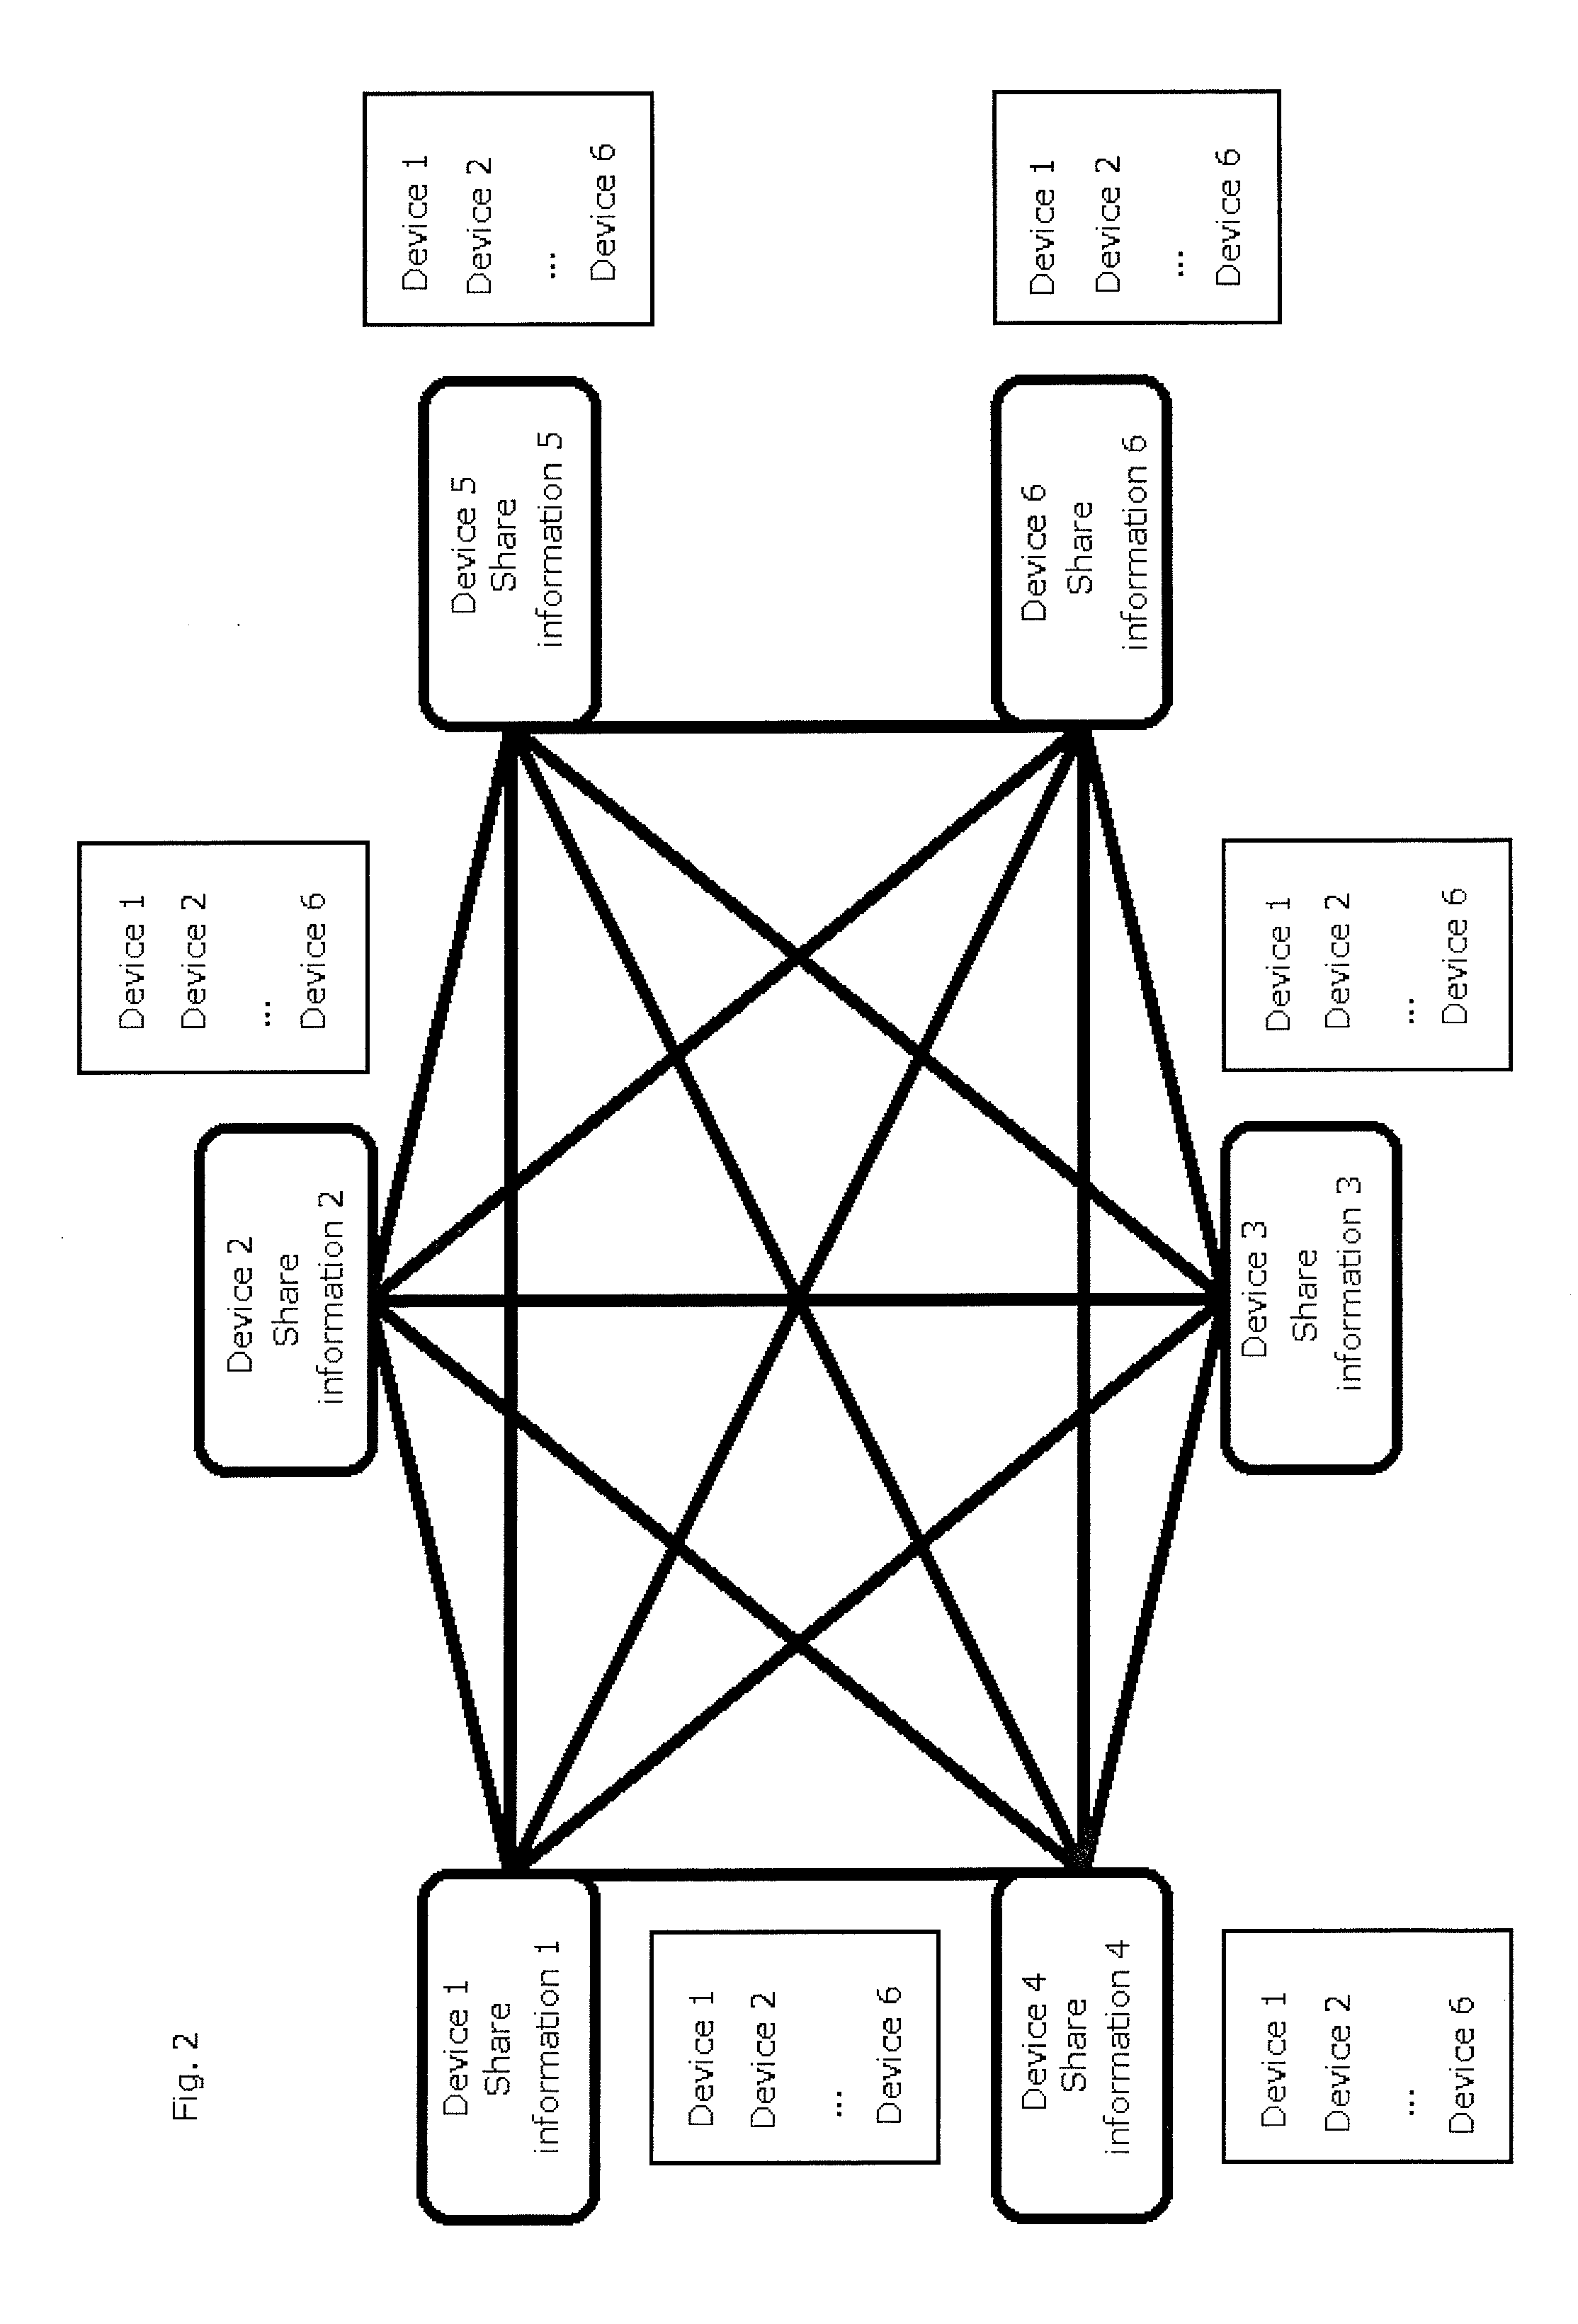 Network device and information sharing system